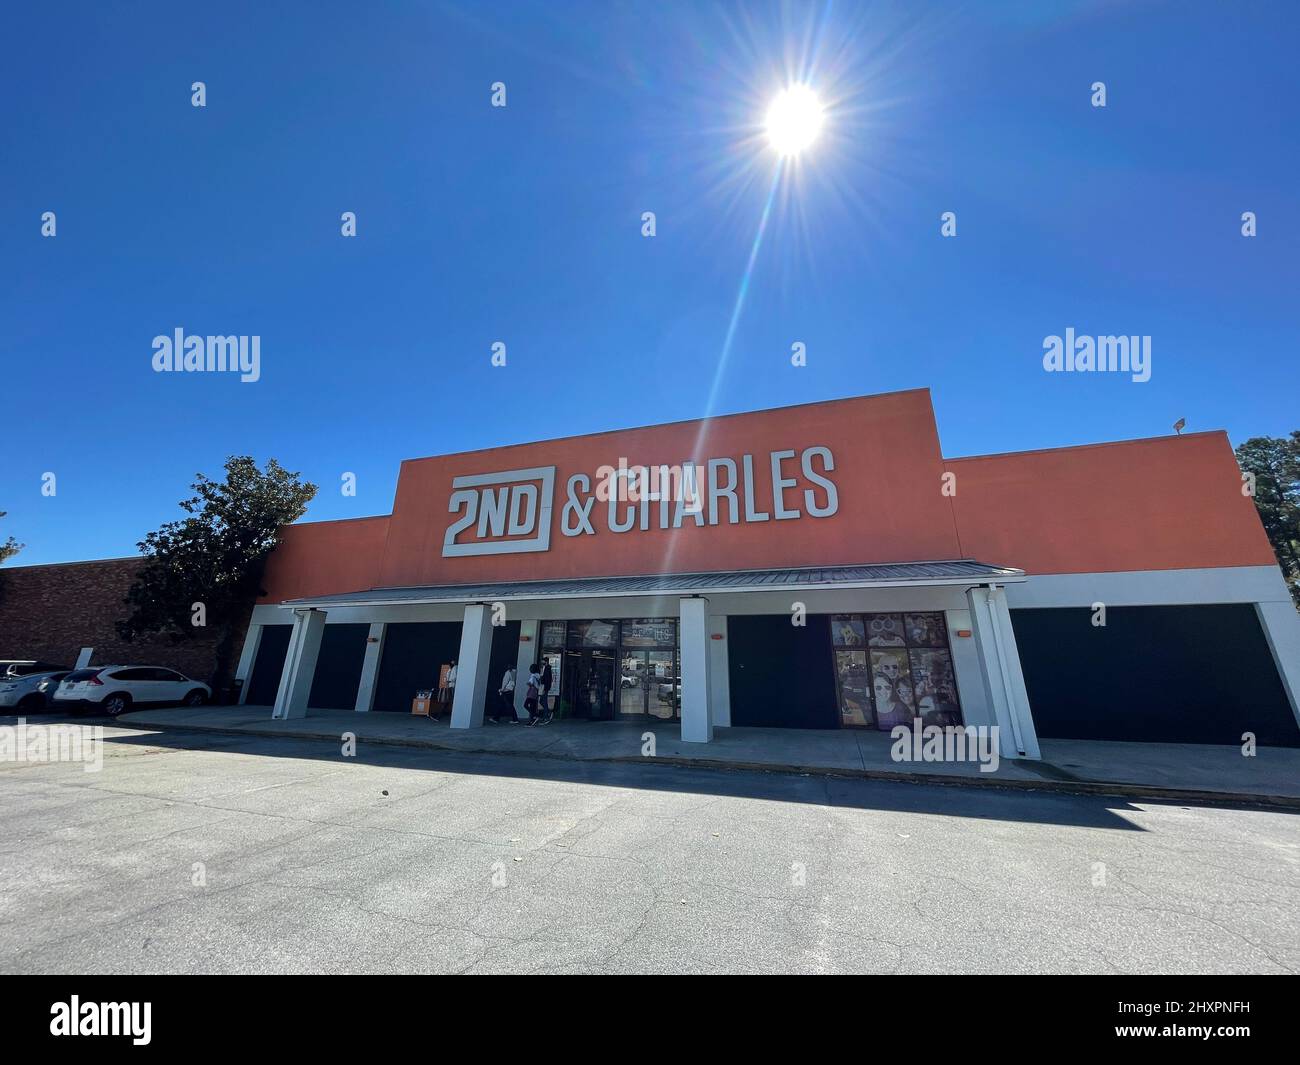 Augusta, Ga USA - 03 13 22: 2nd and Charles vintage retail super store Stock Photo